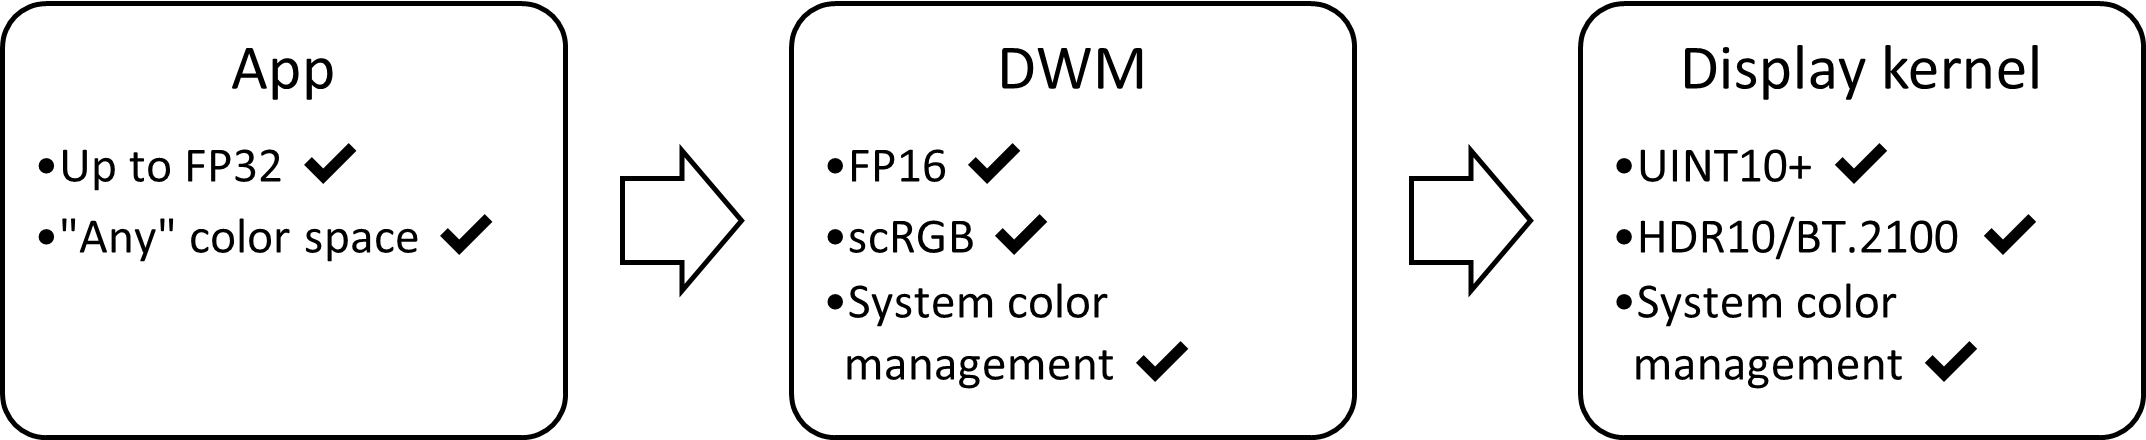 block diagram of HDR display stack: FP16, scRGB, with auto color management